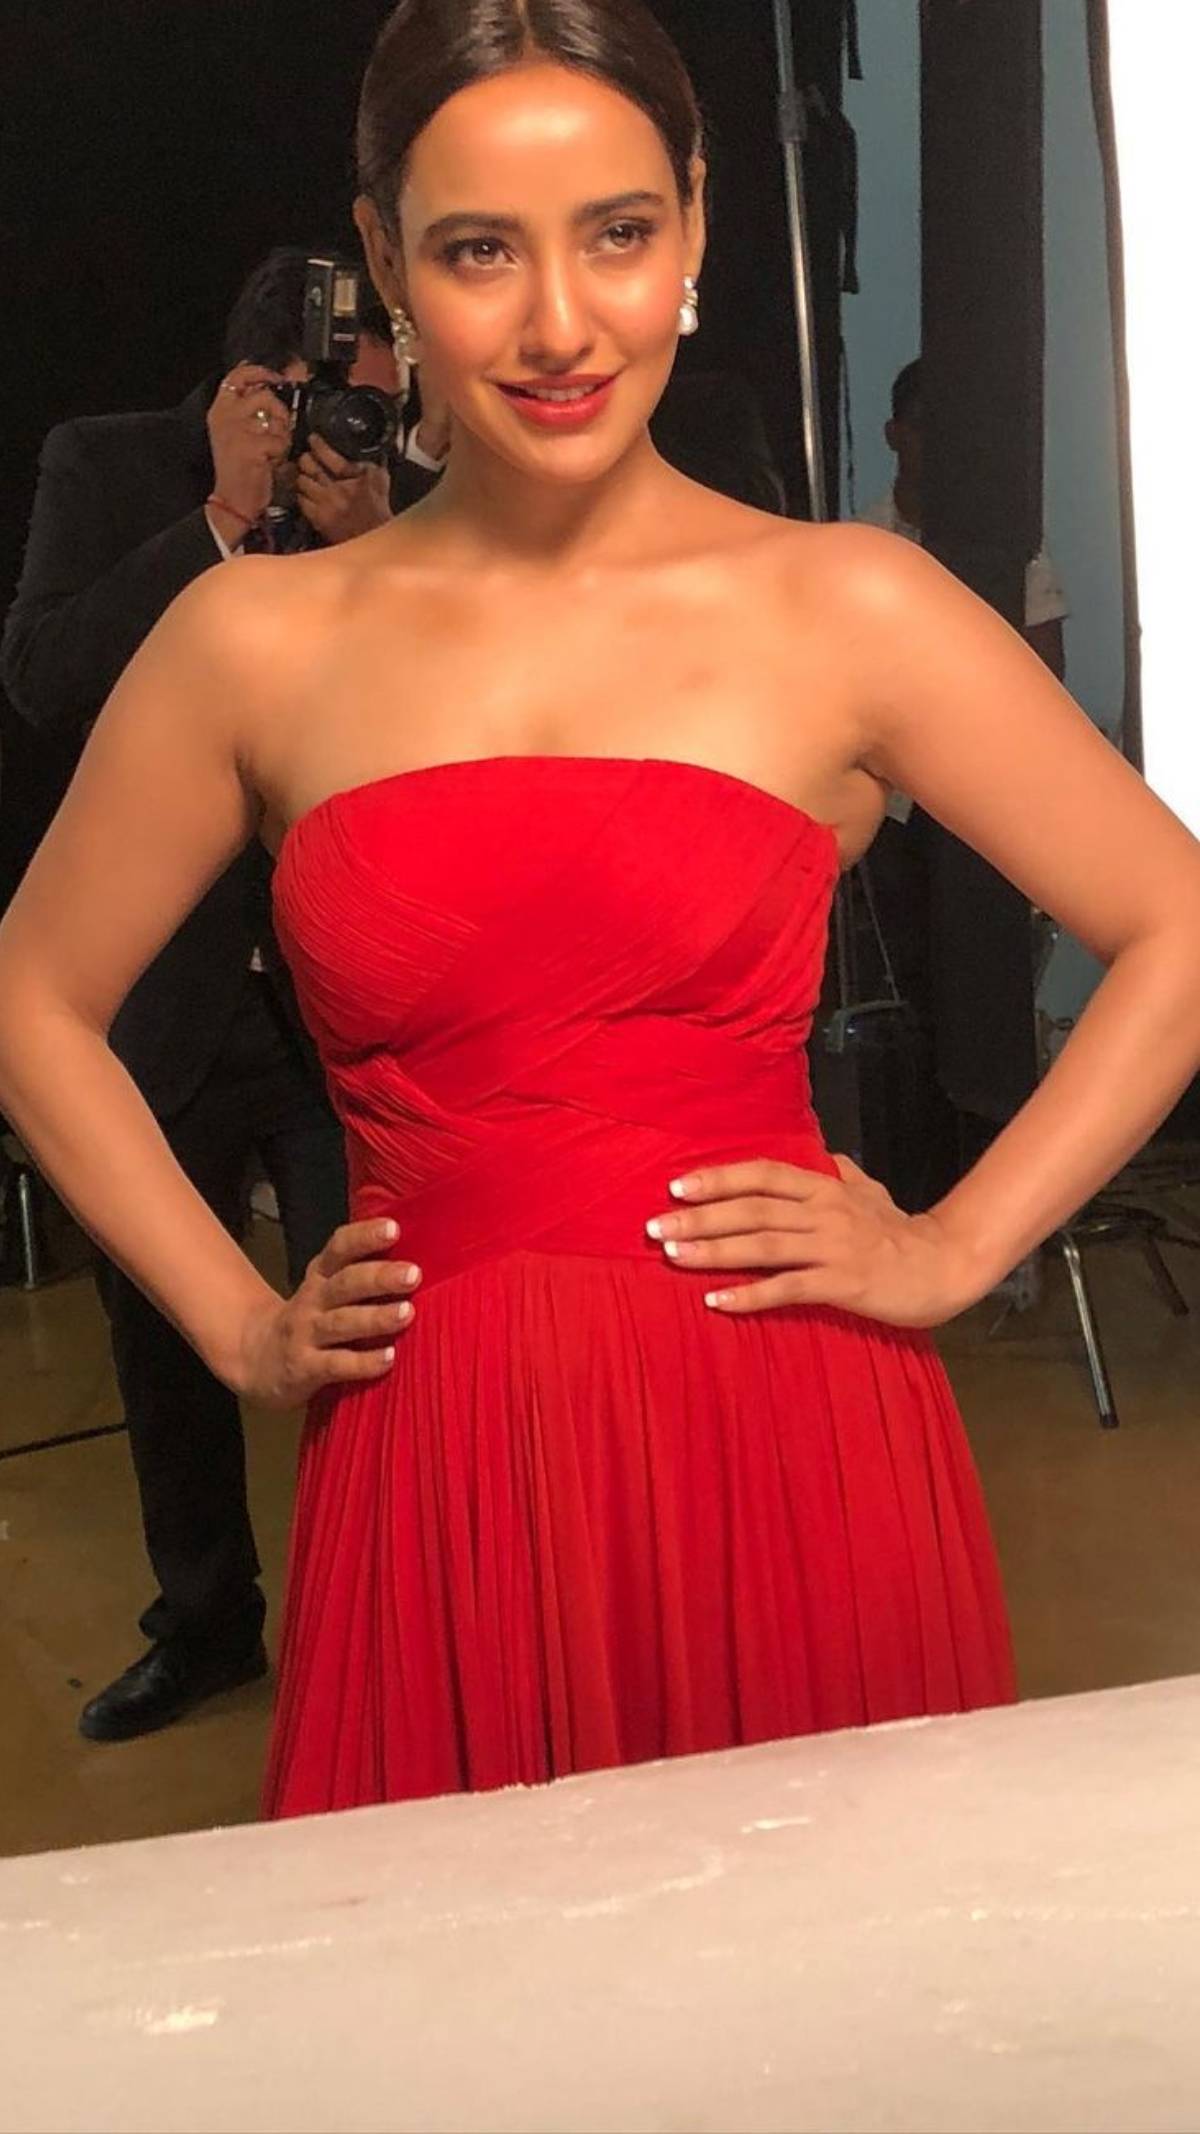 Neha Sharma looks sexy in the off-shoulder red dress